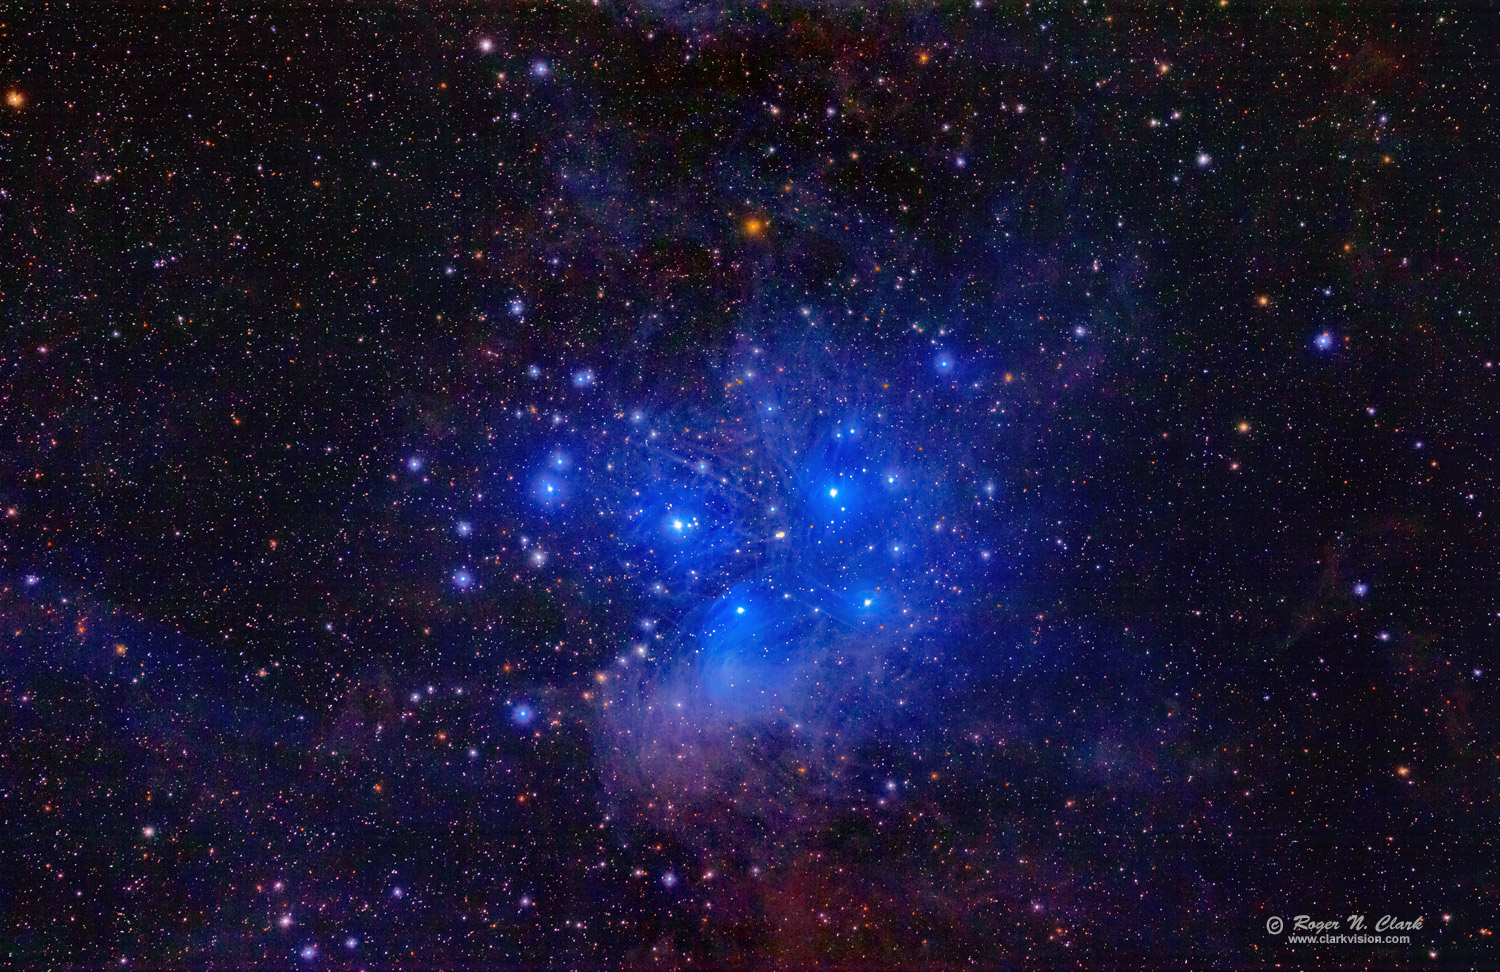 image pleiades.m45.rnclark.c11.21.2014-acr-t20J6A1575-1629-t3brs.h-1500s.jpg is Copyrighted by Roger N. Clark, www.clarkvision.com